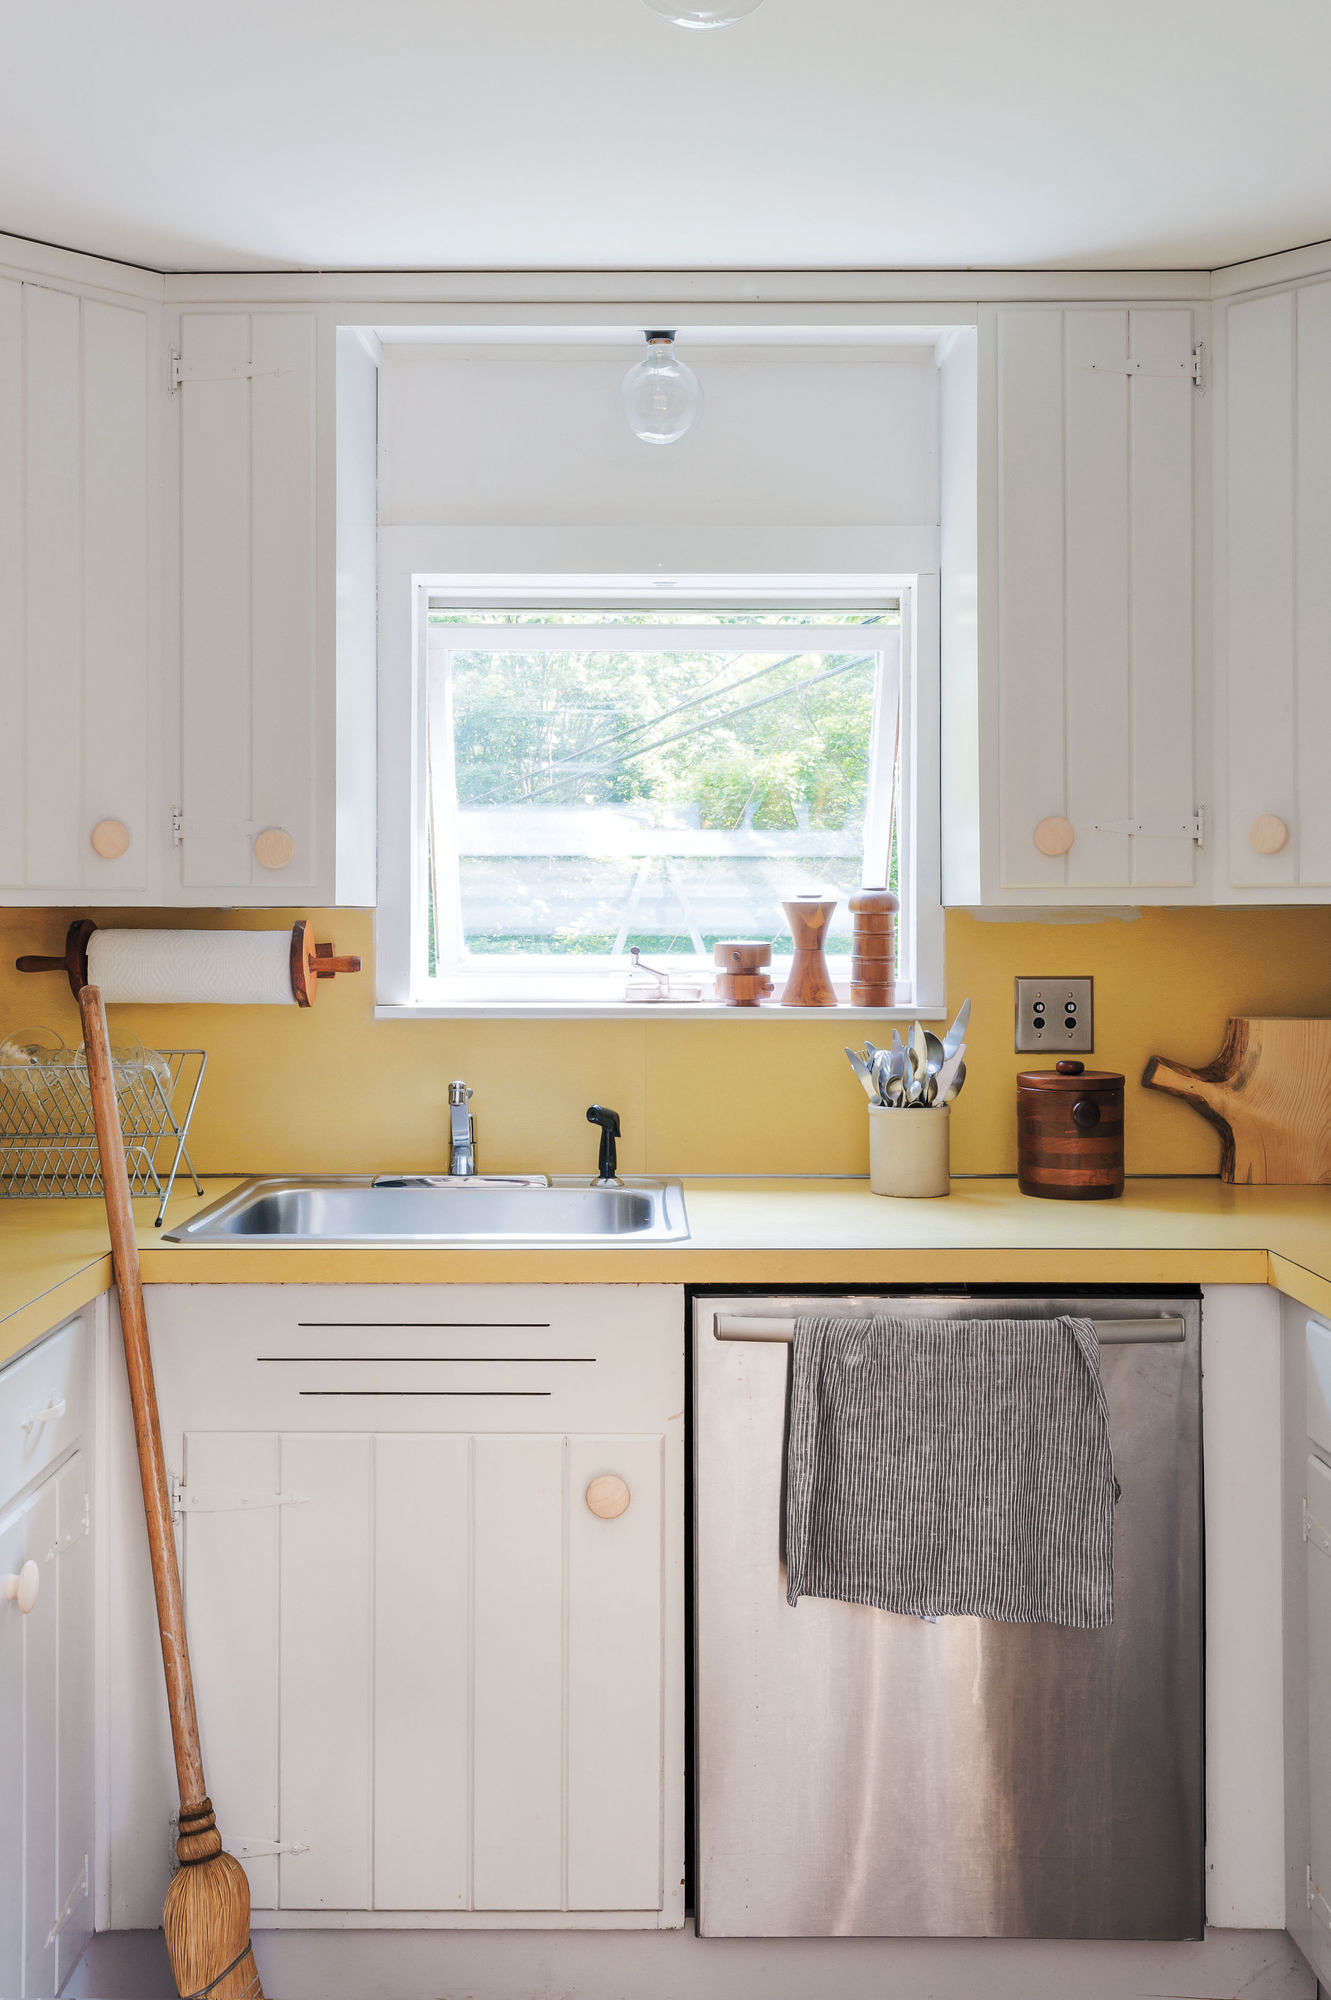 Tips On Painting Your Kitchen Cabinets, Painting The Inside Of Your Kitchen Cabinets